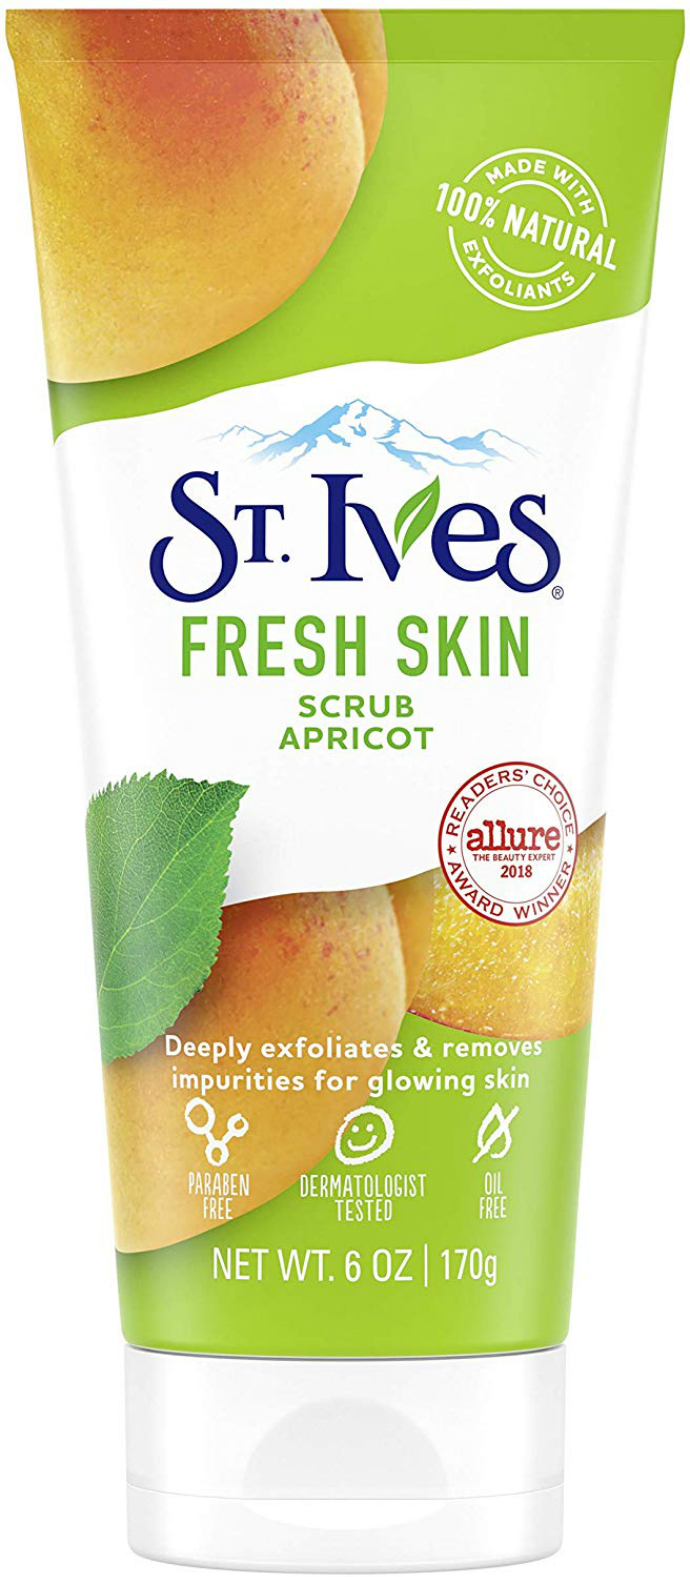 ST. IVES St. Ives Fresh Skin Apricot Scrub Deeply Exfoliates for glowing skin 6 oz, 170g (mos)